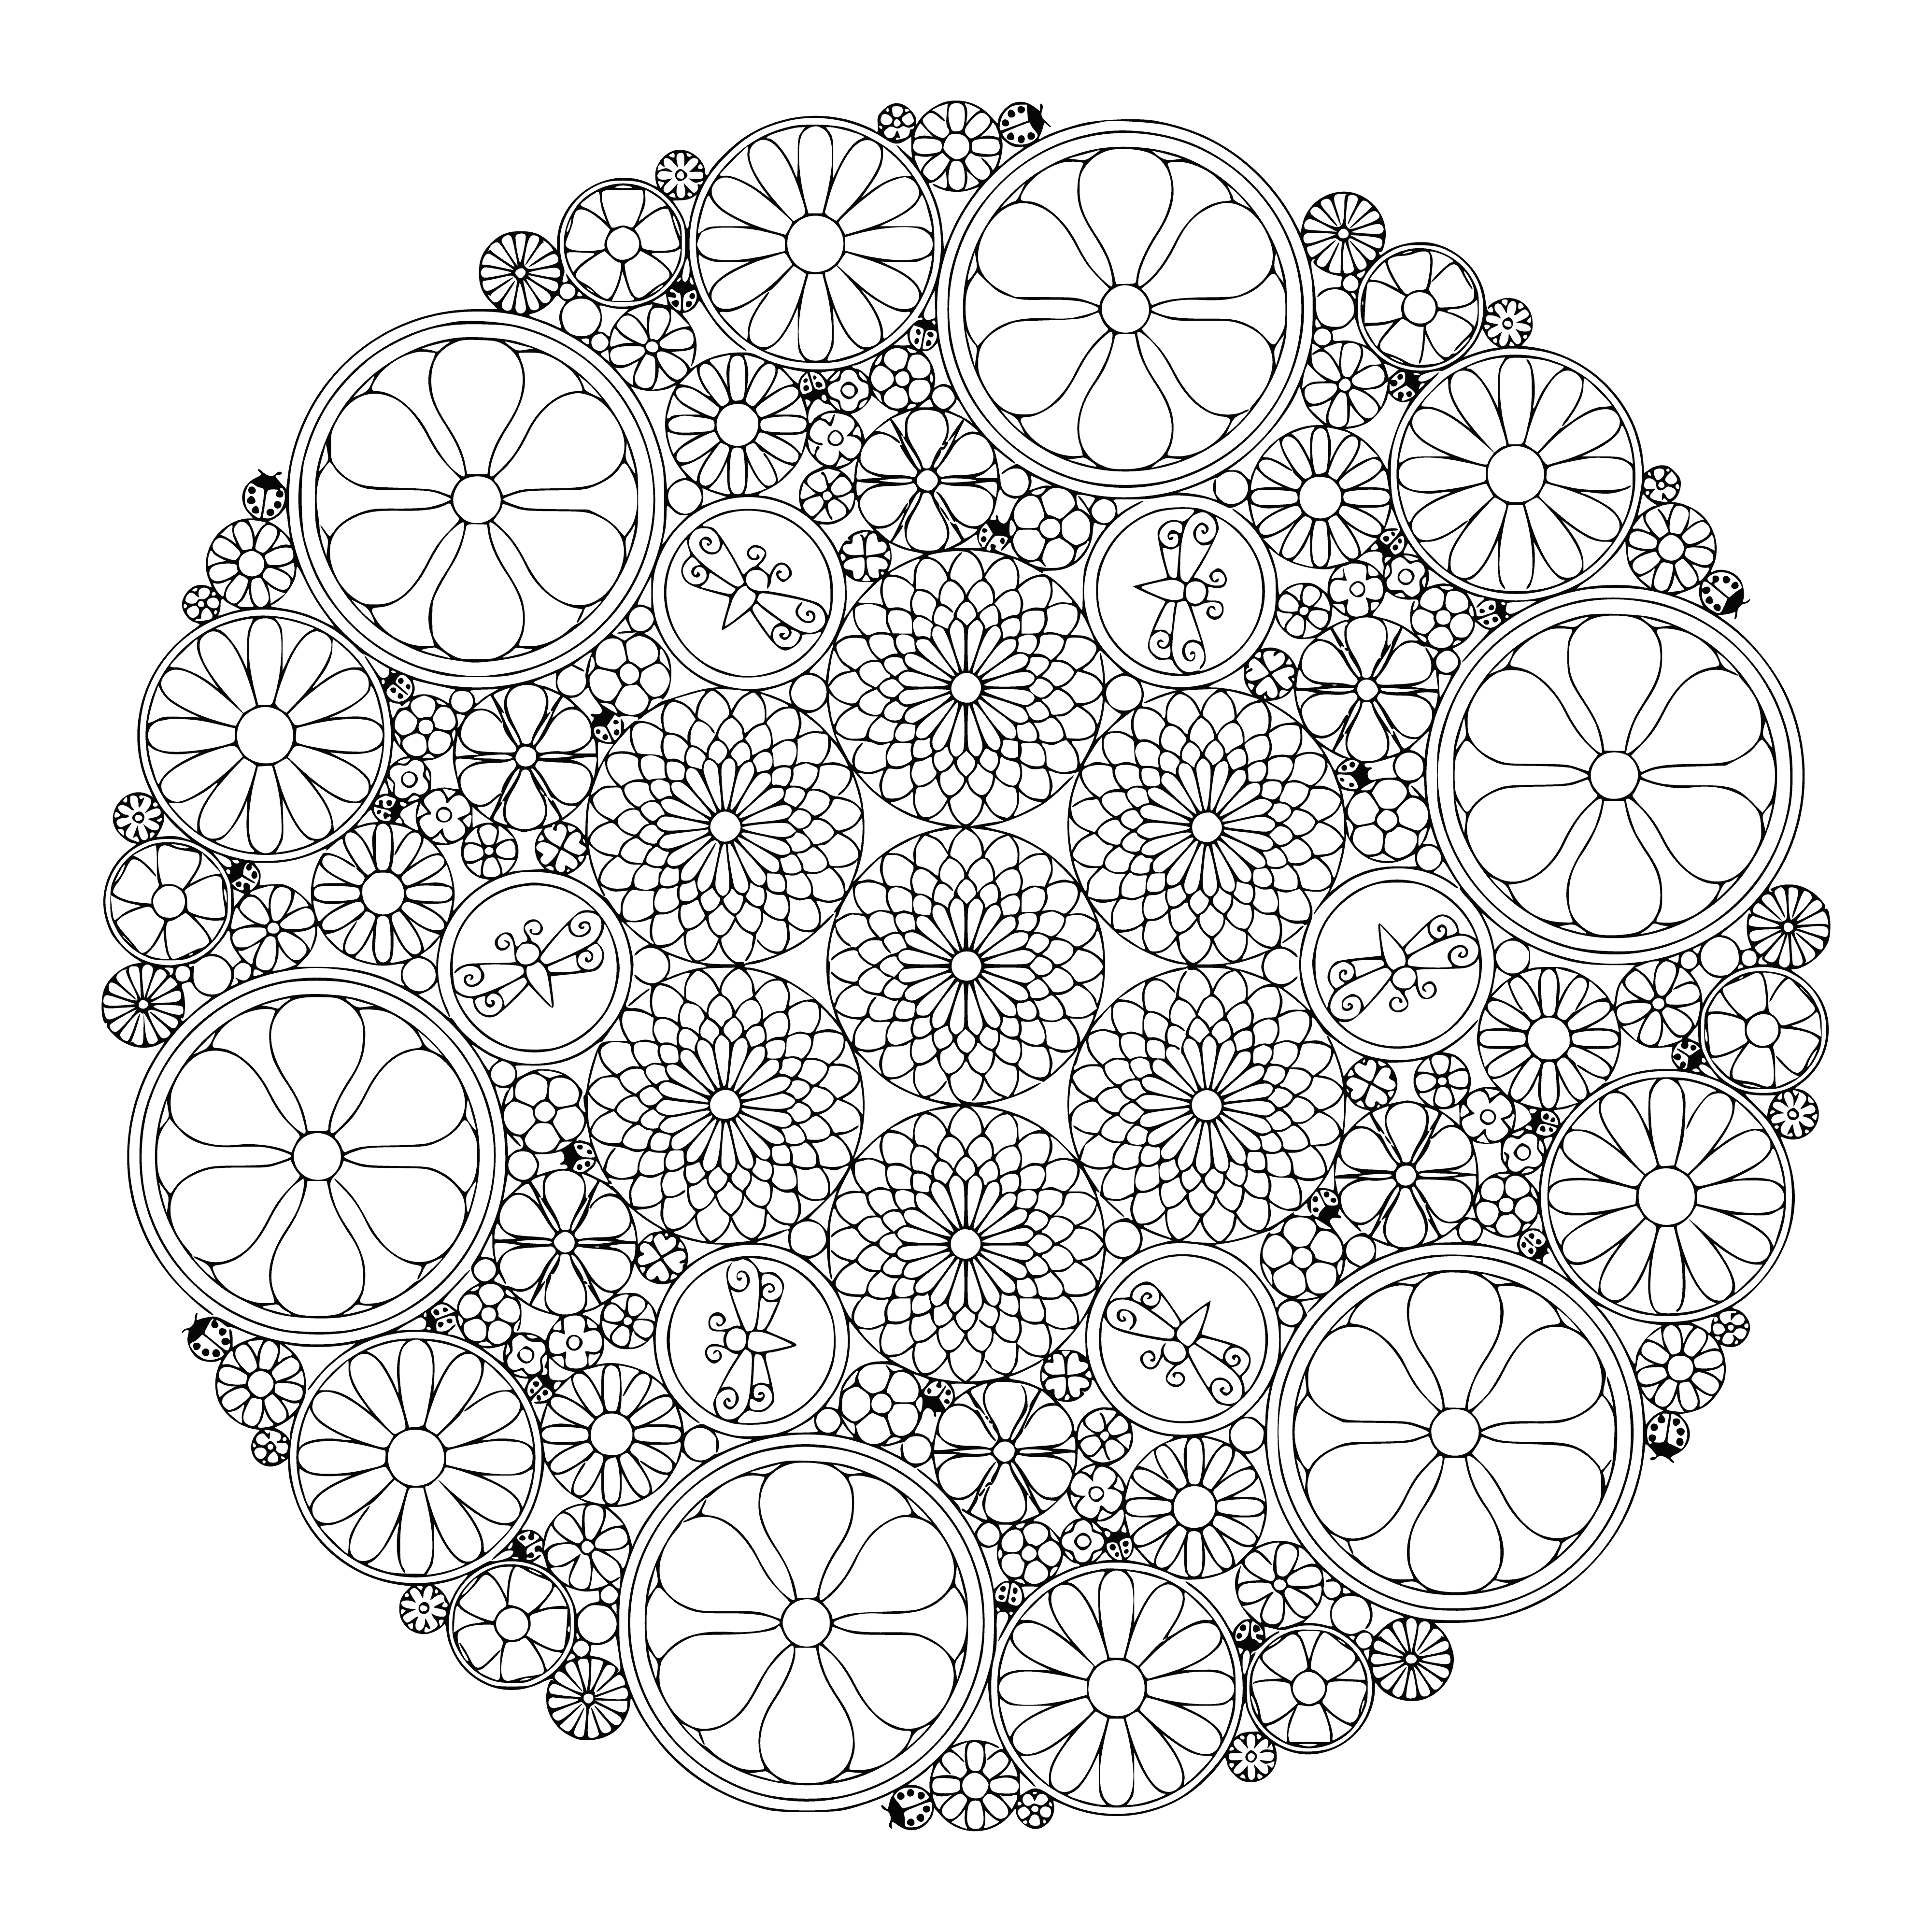 coloring page: Relax with a detailed Flower Mandala coloring page. It's a great, meditative activity with many intricate details!